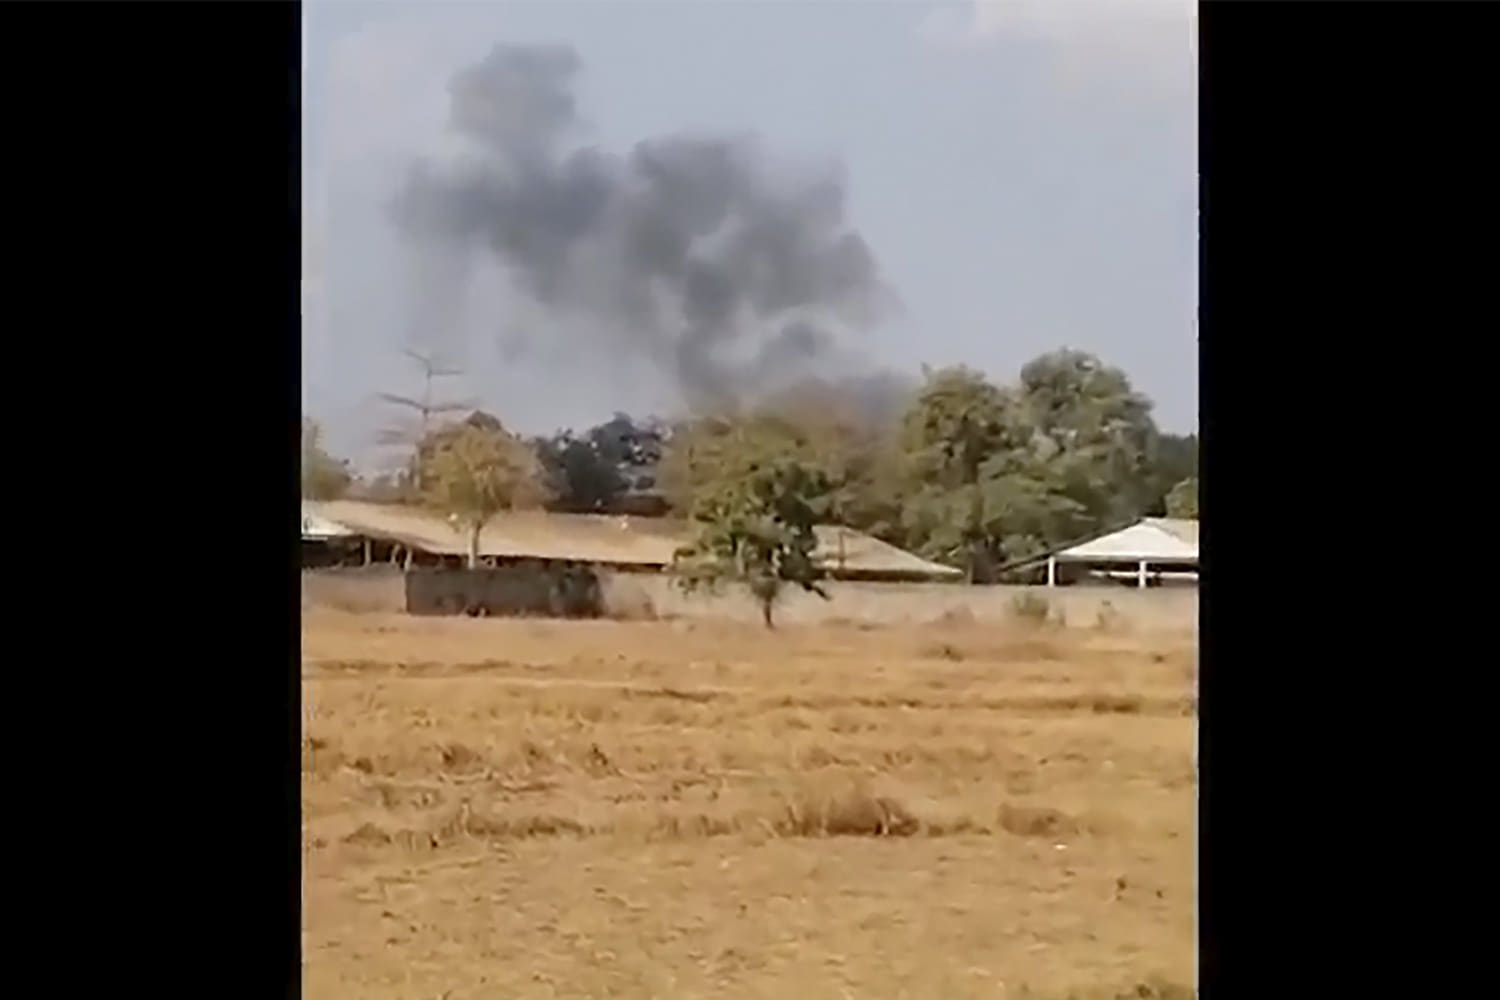 Munitions explosion at a Cambodian army base kills 20 soldiers, cause is unclear